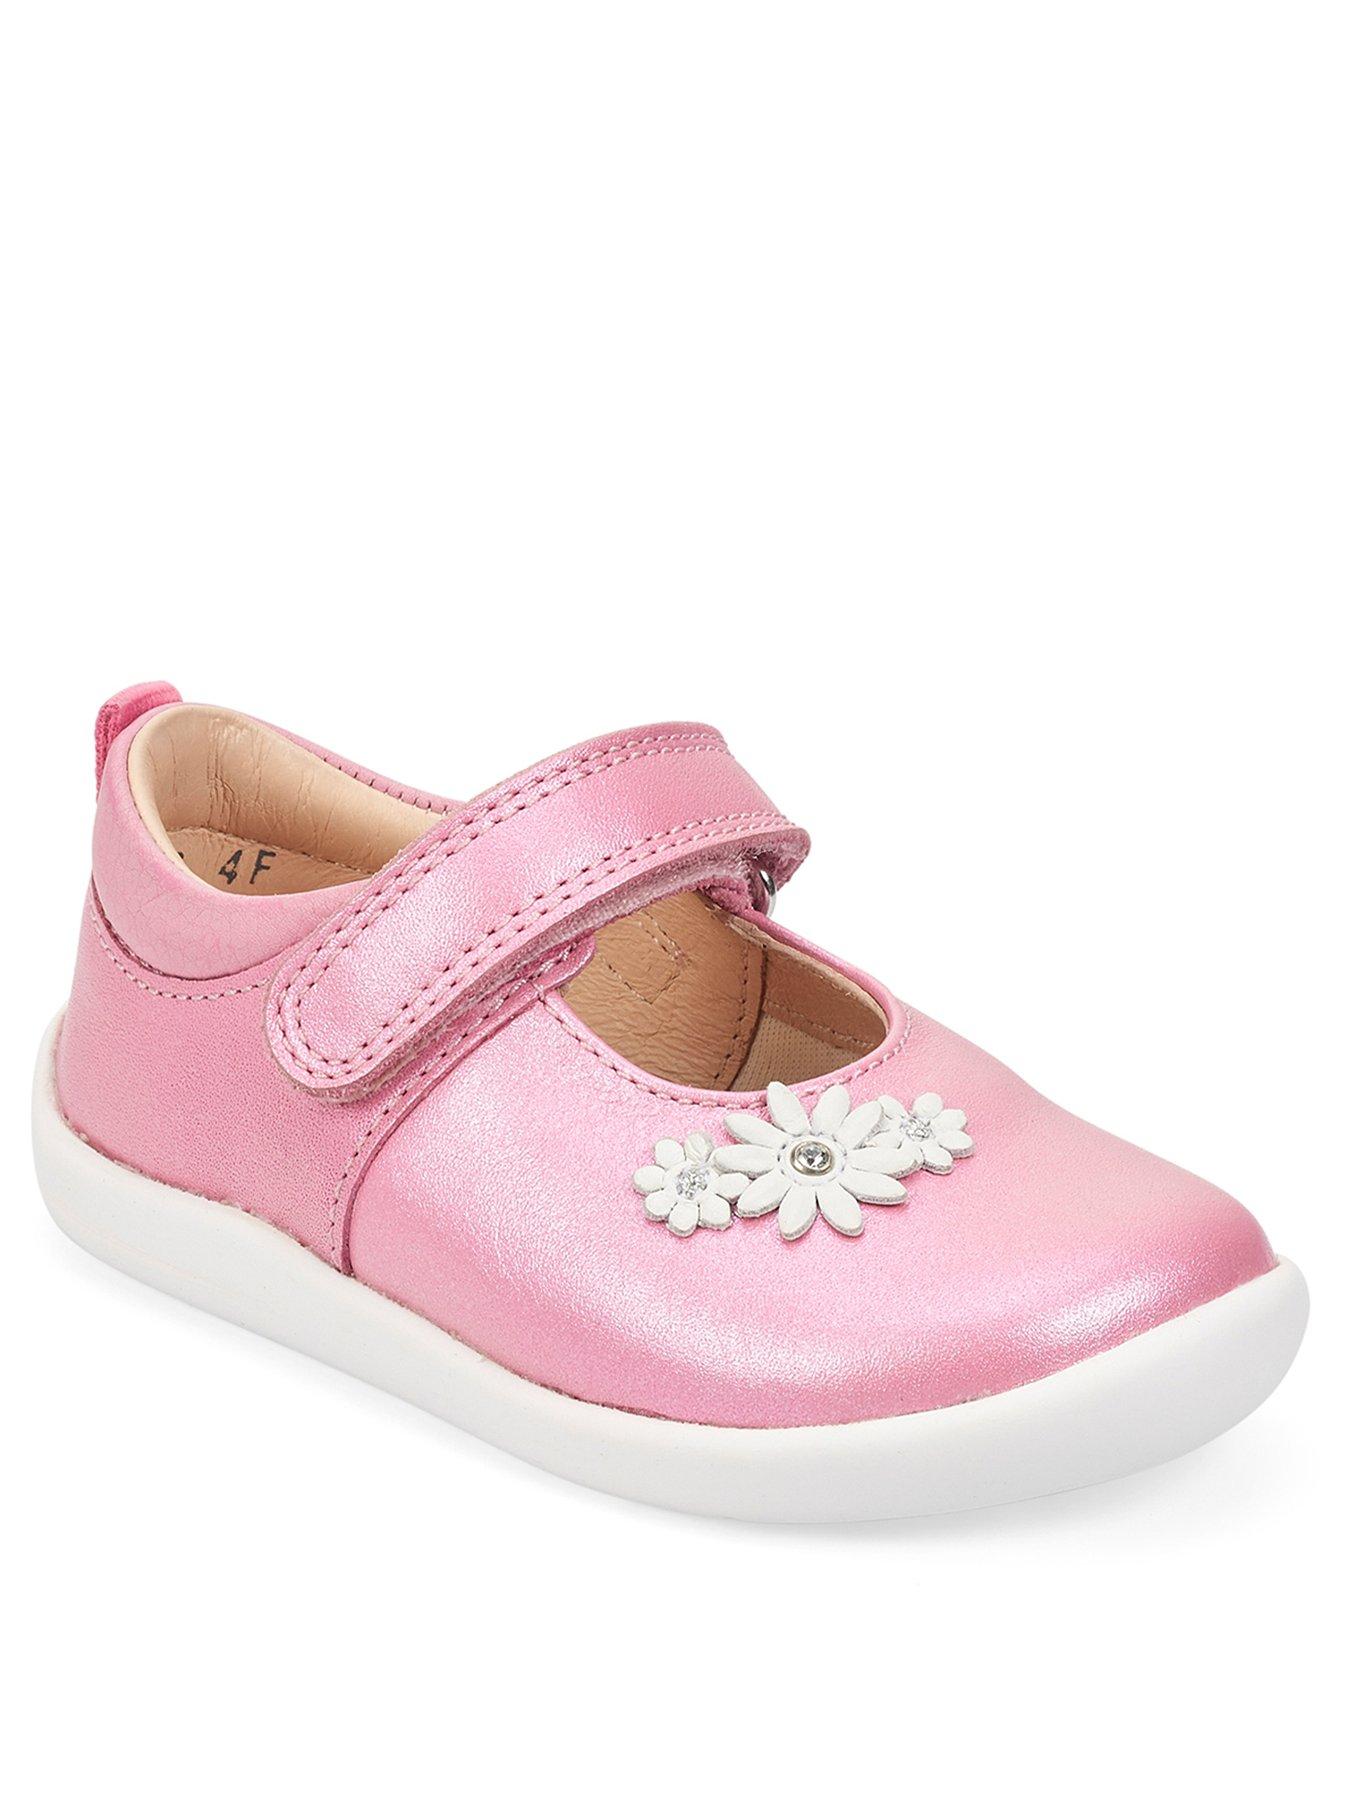 Shoes & boots Start-rite Start-rite First Steps Fairy Tale Mary Jane Shoe